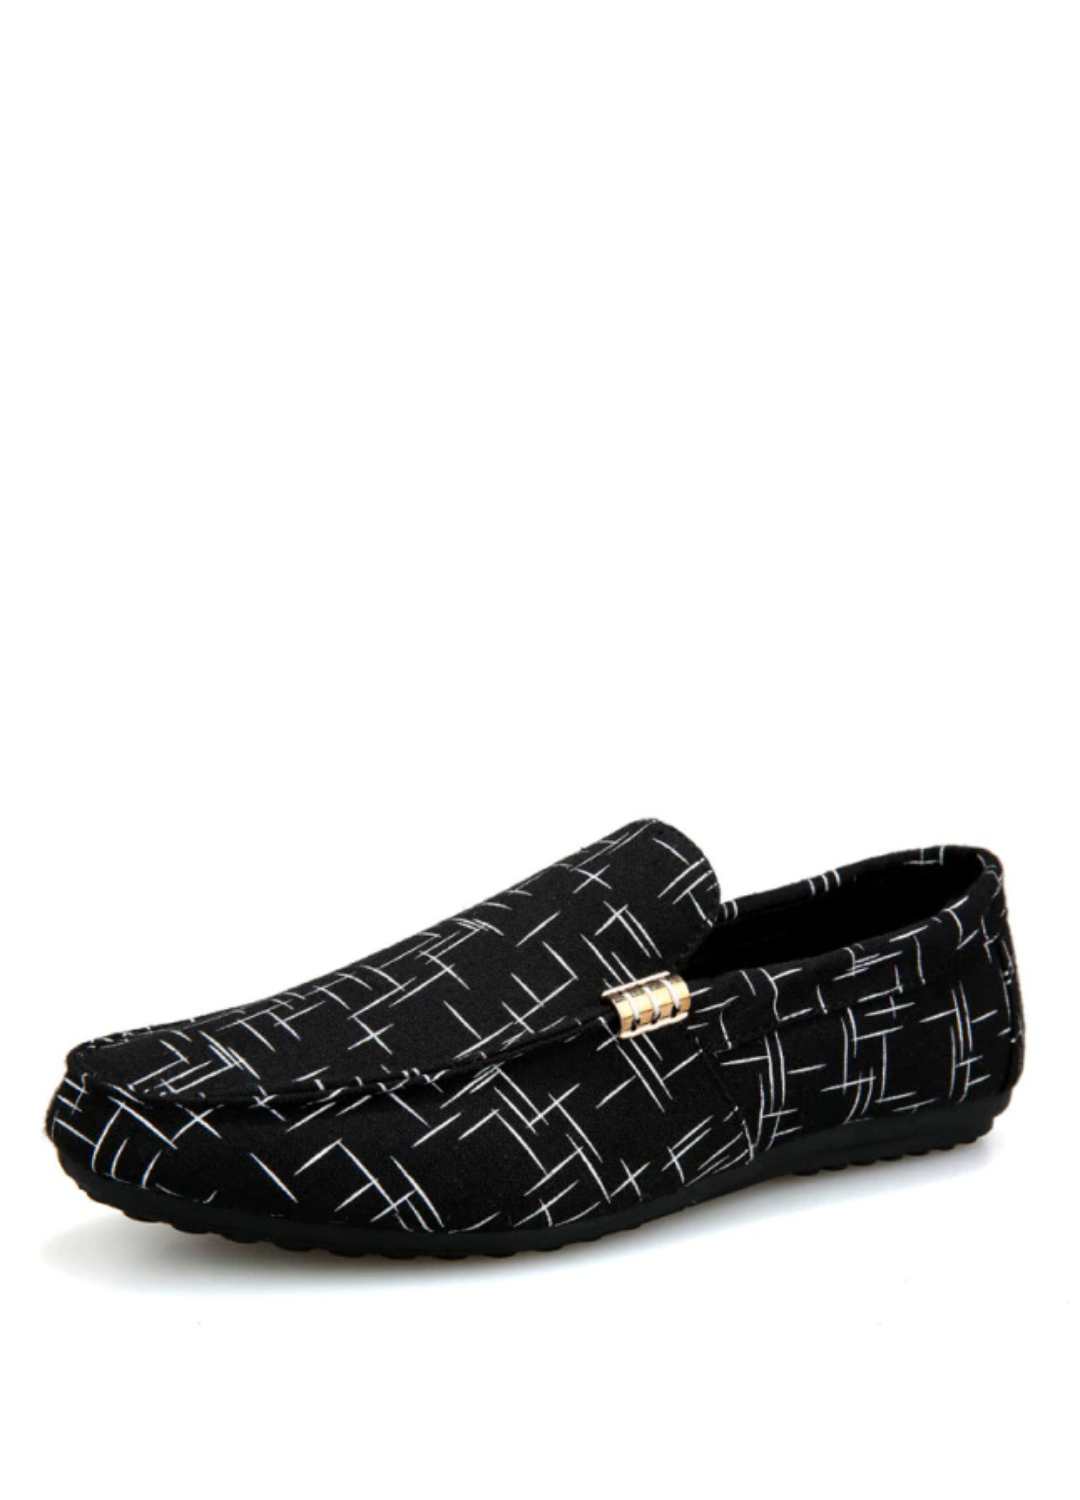 Chucho Men's Loafers Casual Shoes | Ultrasellershoes.com – USS® Shoes